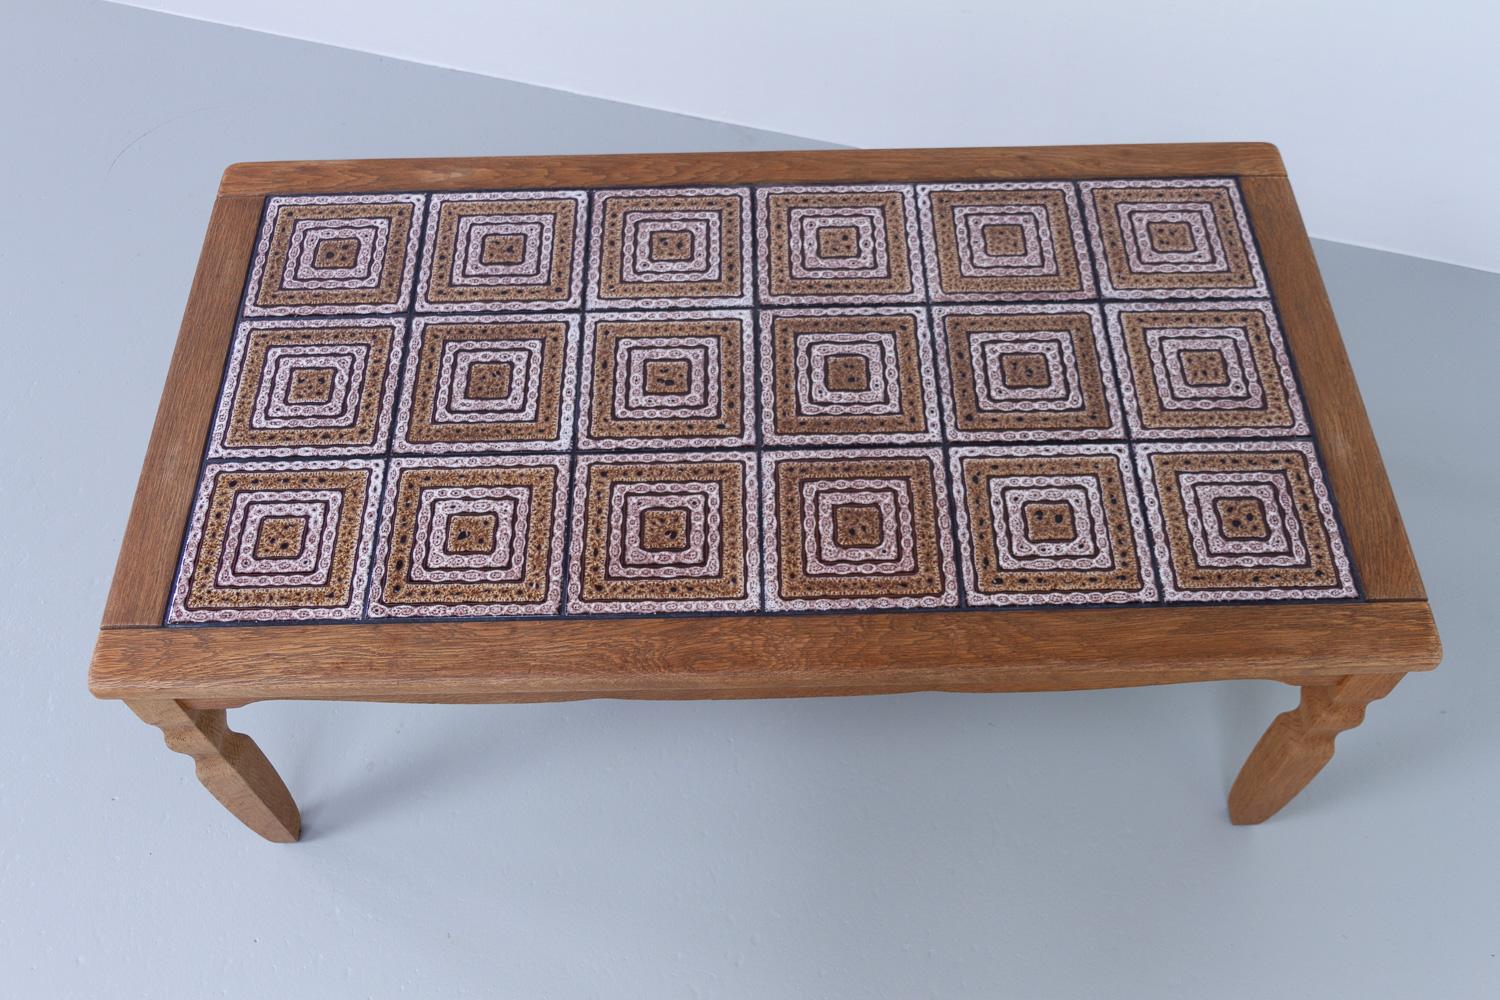 Vintage Danish Brutalist Coffee Table in Oak with Tiles, 1960s. For Sale 1